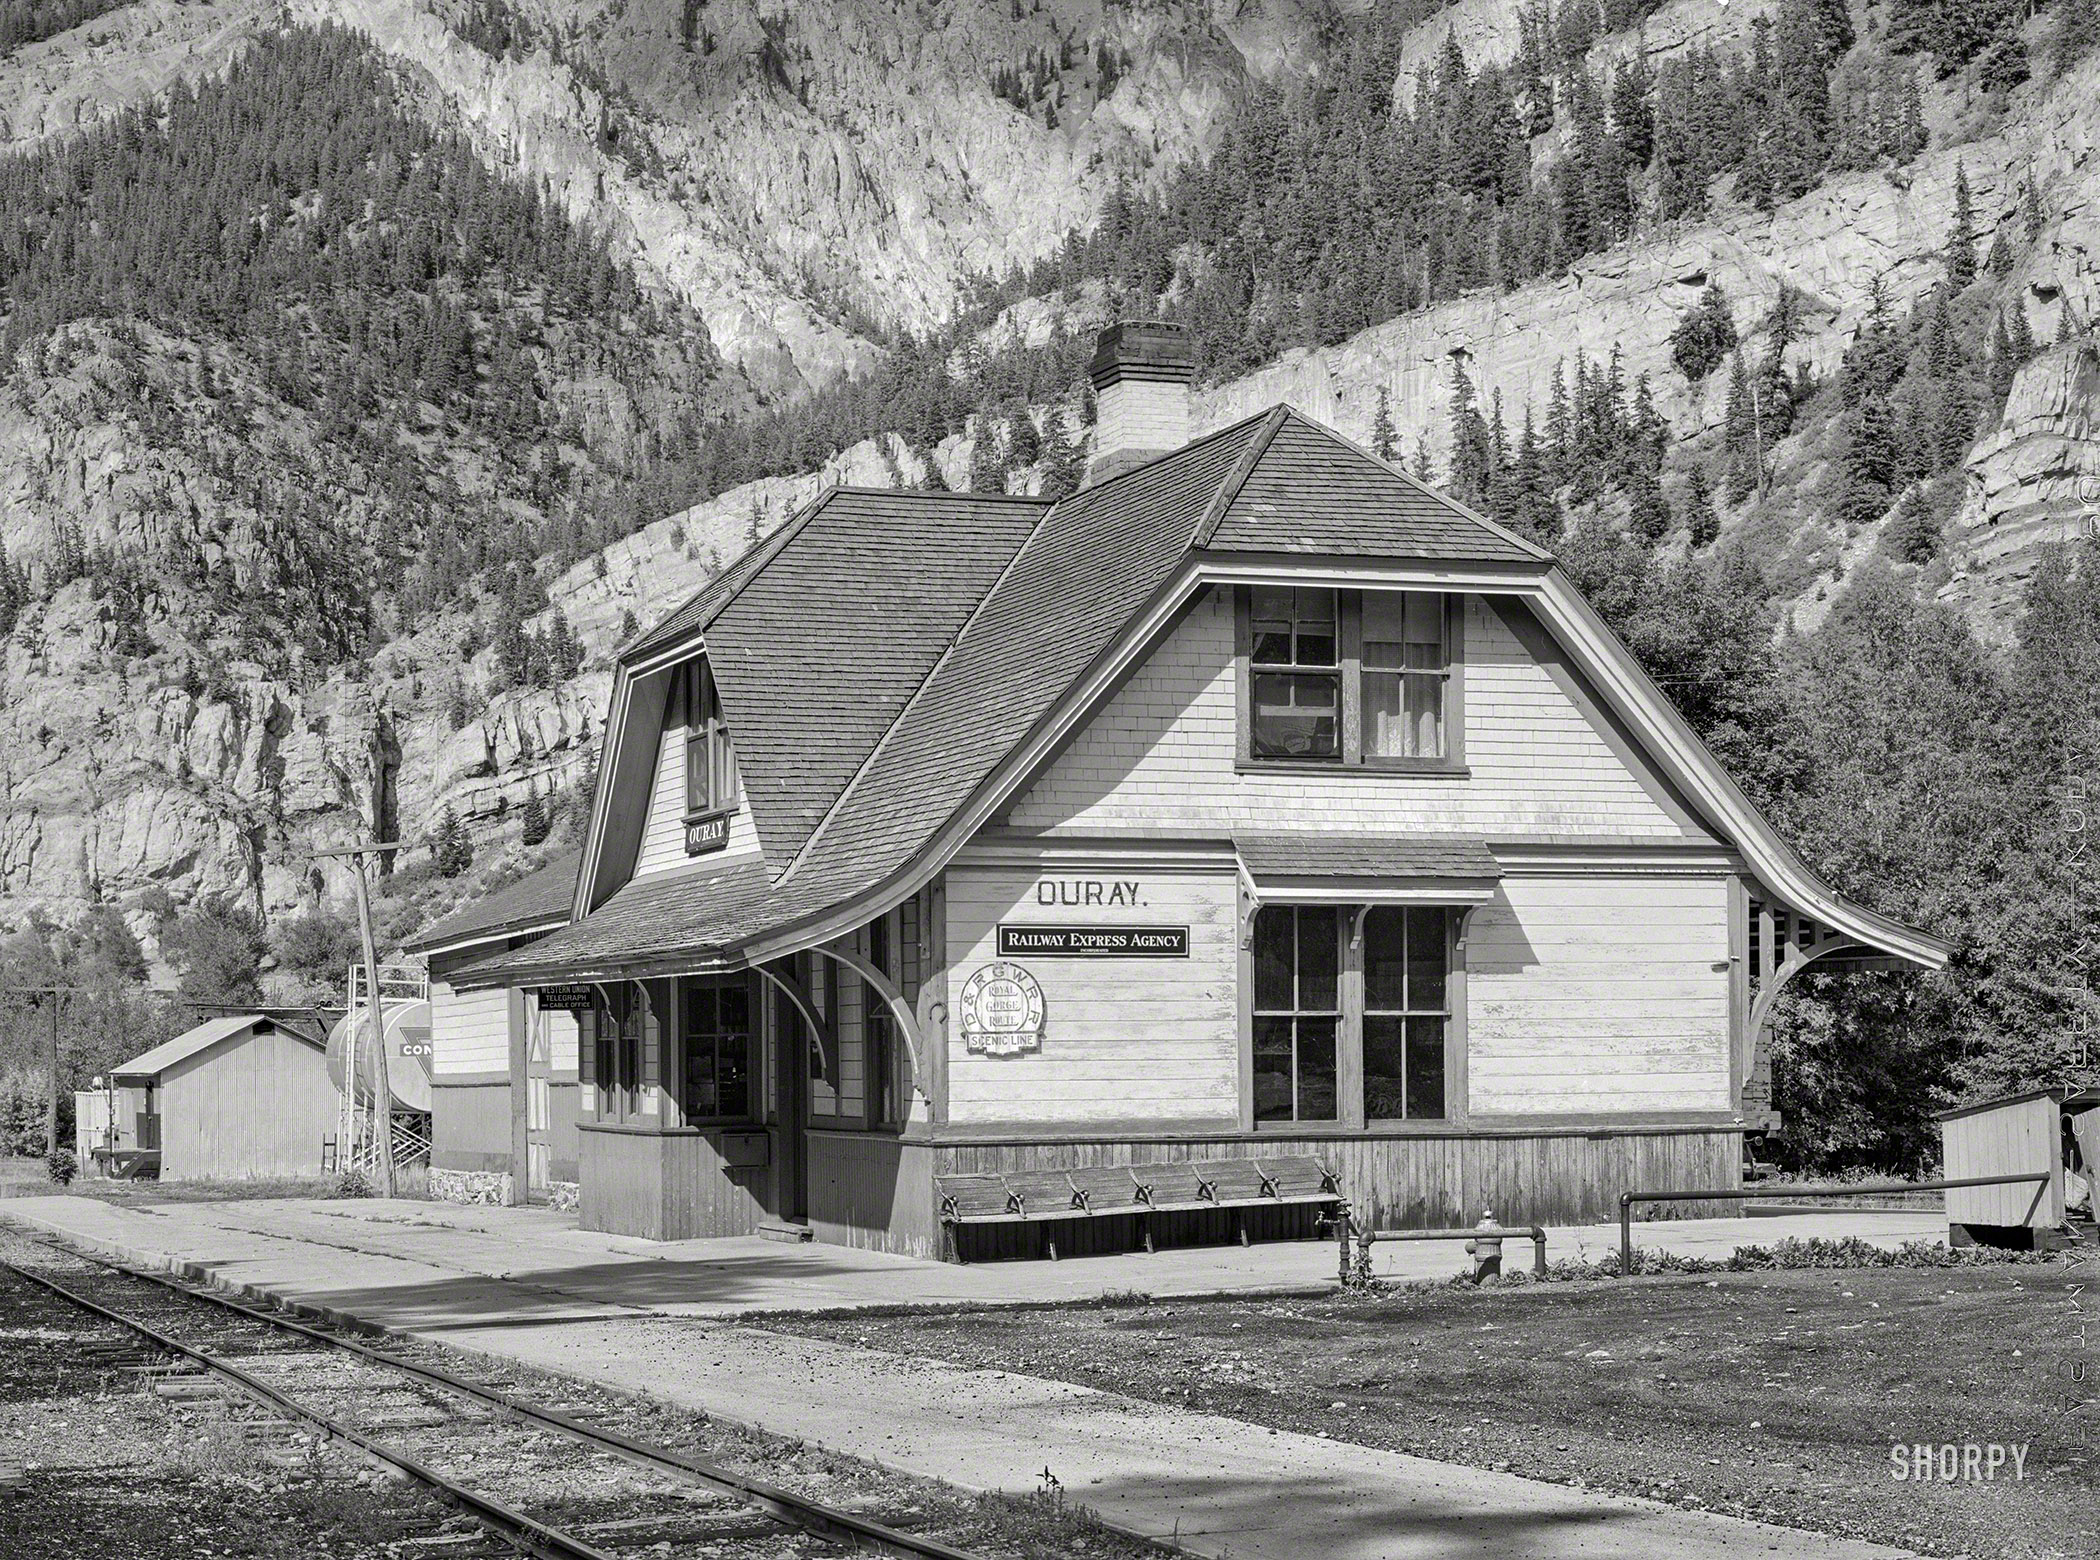 September 1940. "Station of the Denver & Rio Grande Western Railroad at Ouray, Colorado. This narrow-gauge line formerly had passenger service but now is confined to freight service." Acetate negative by Russell Lee. View full size.